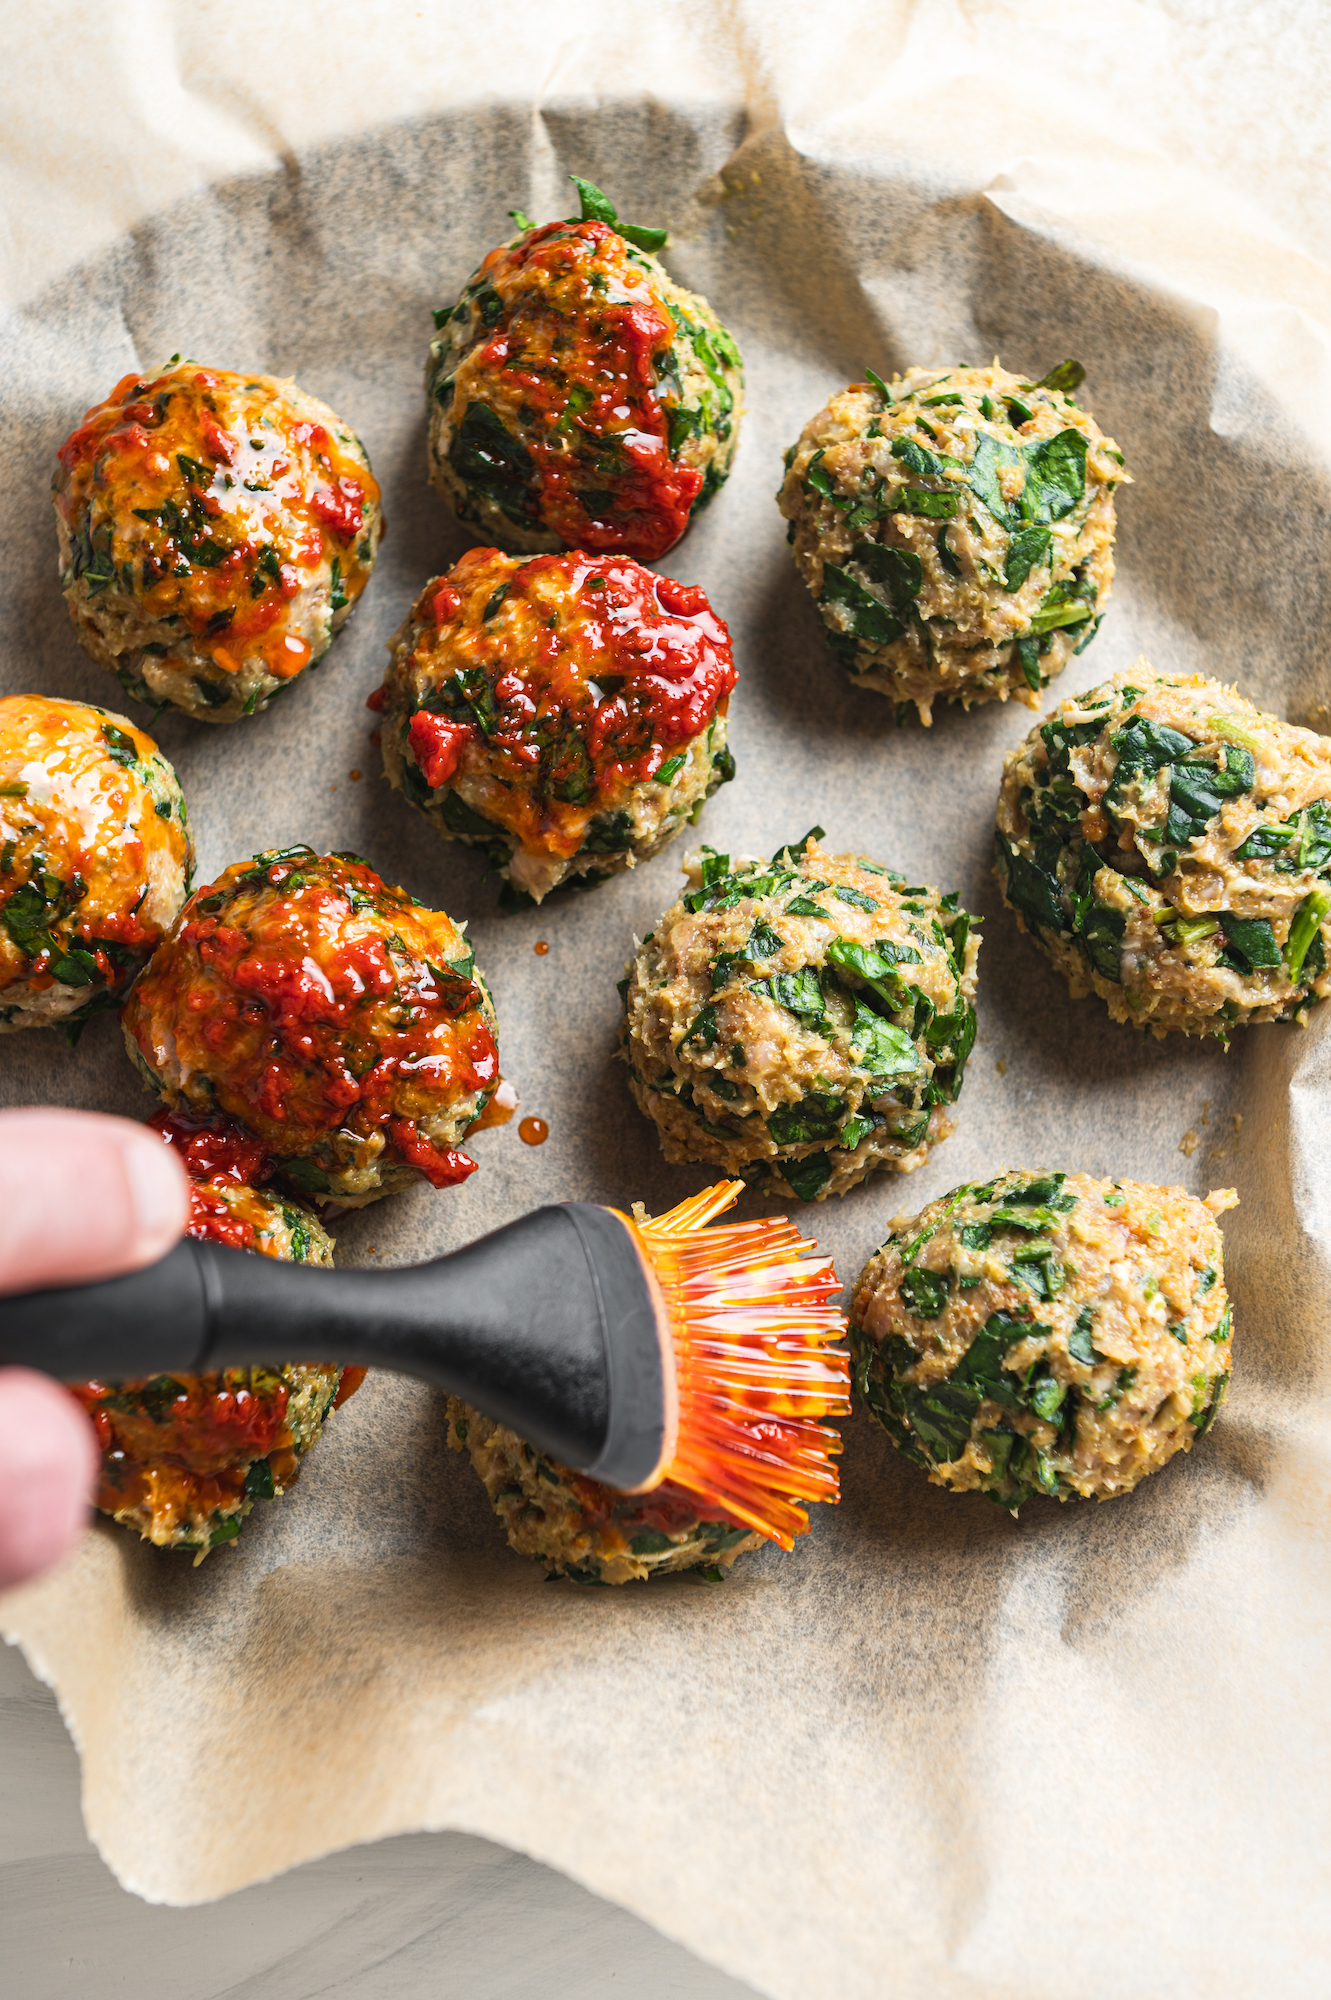 brushing tomato sauce on chicken meatballs by teri-ann carty